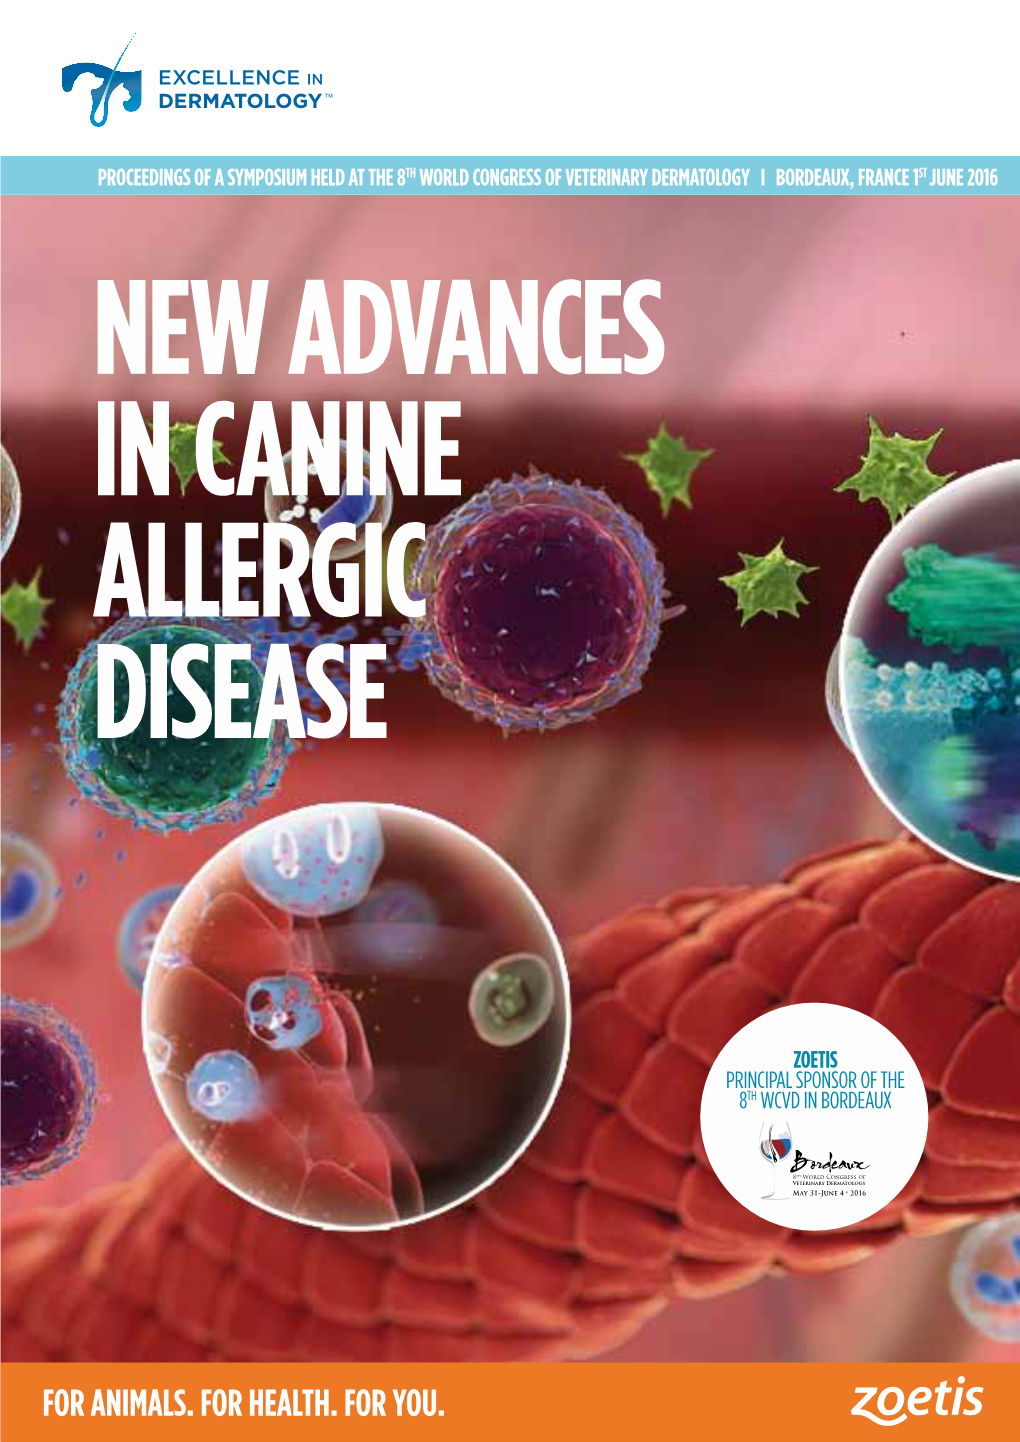 New Advances in Canine Allergic Disease